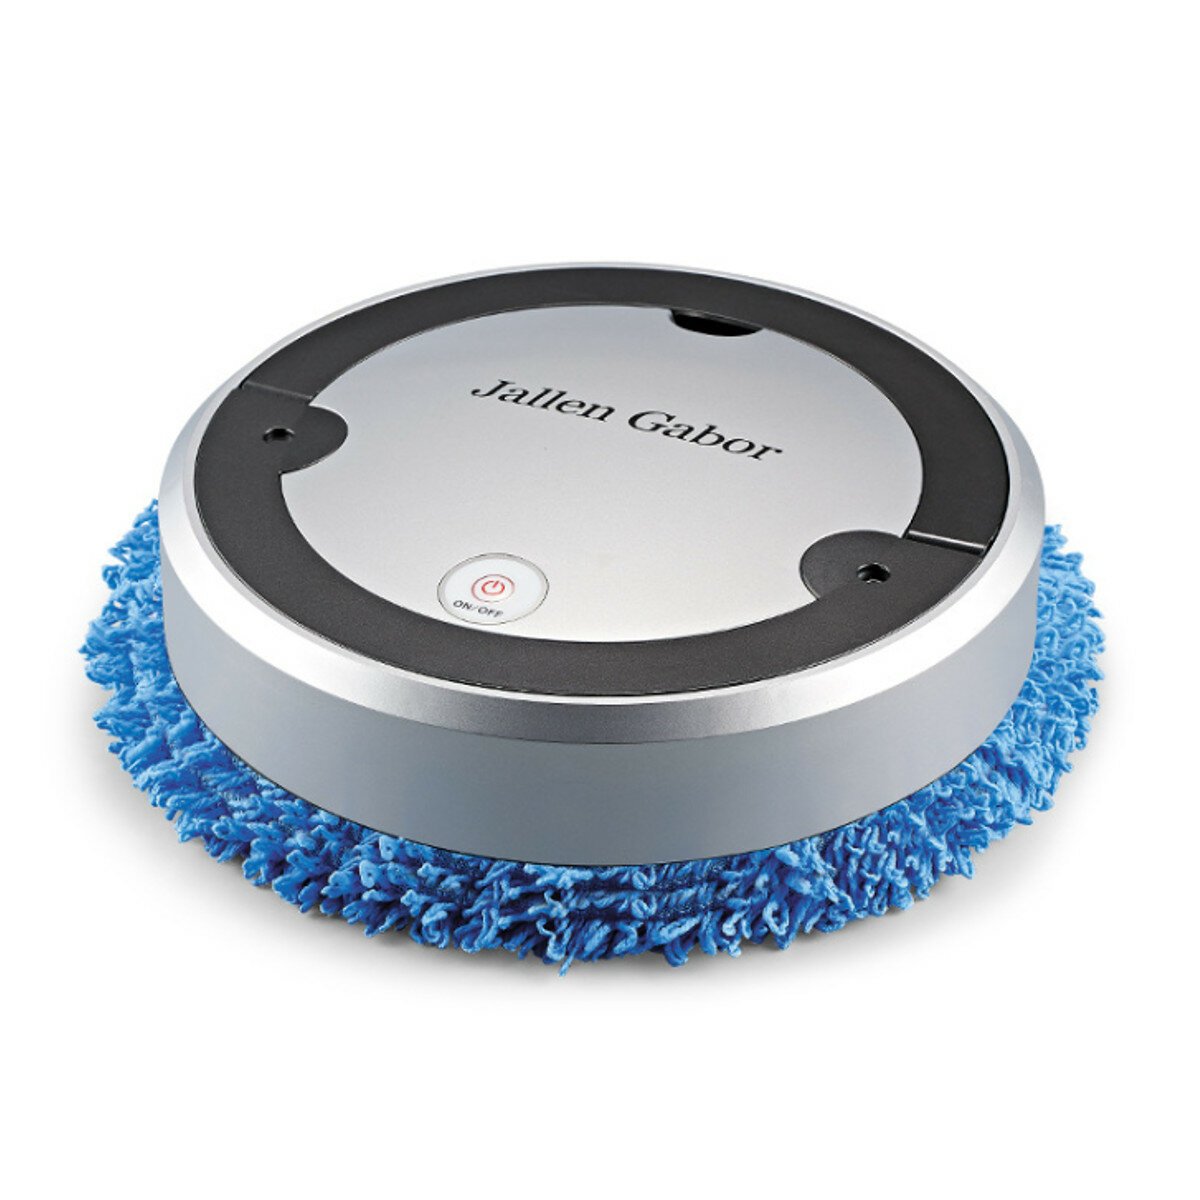 Mopping Robot USB Automatic Charging Cleaner Spray Wet & Dry UV Sterilization Machine